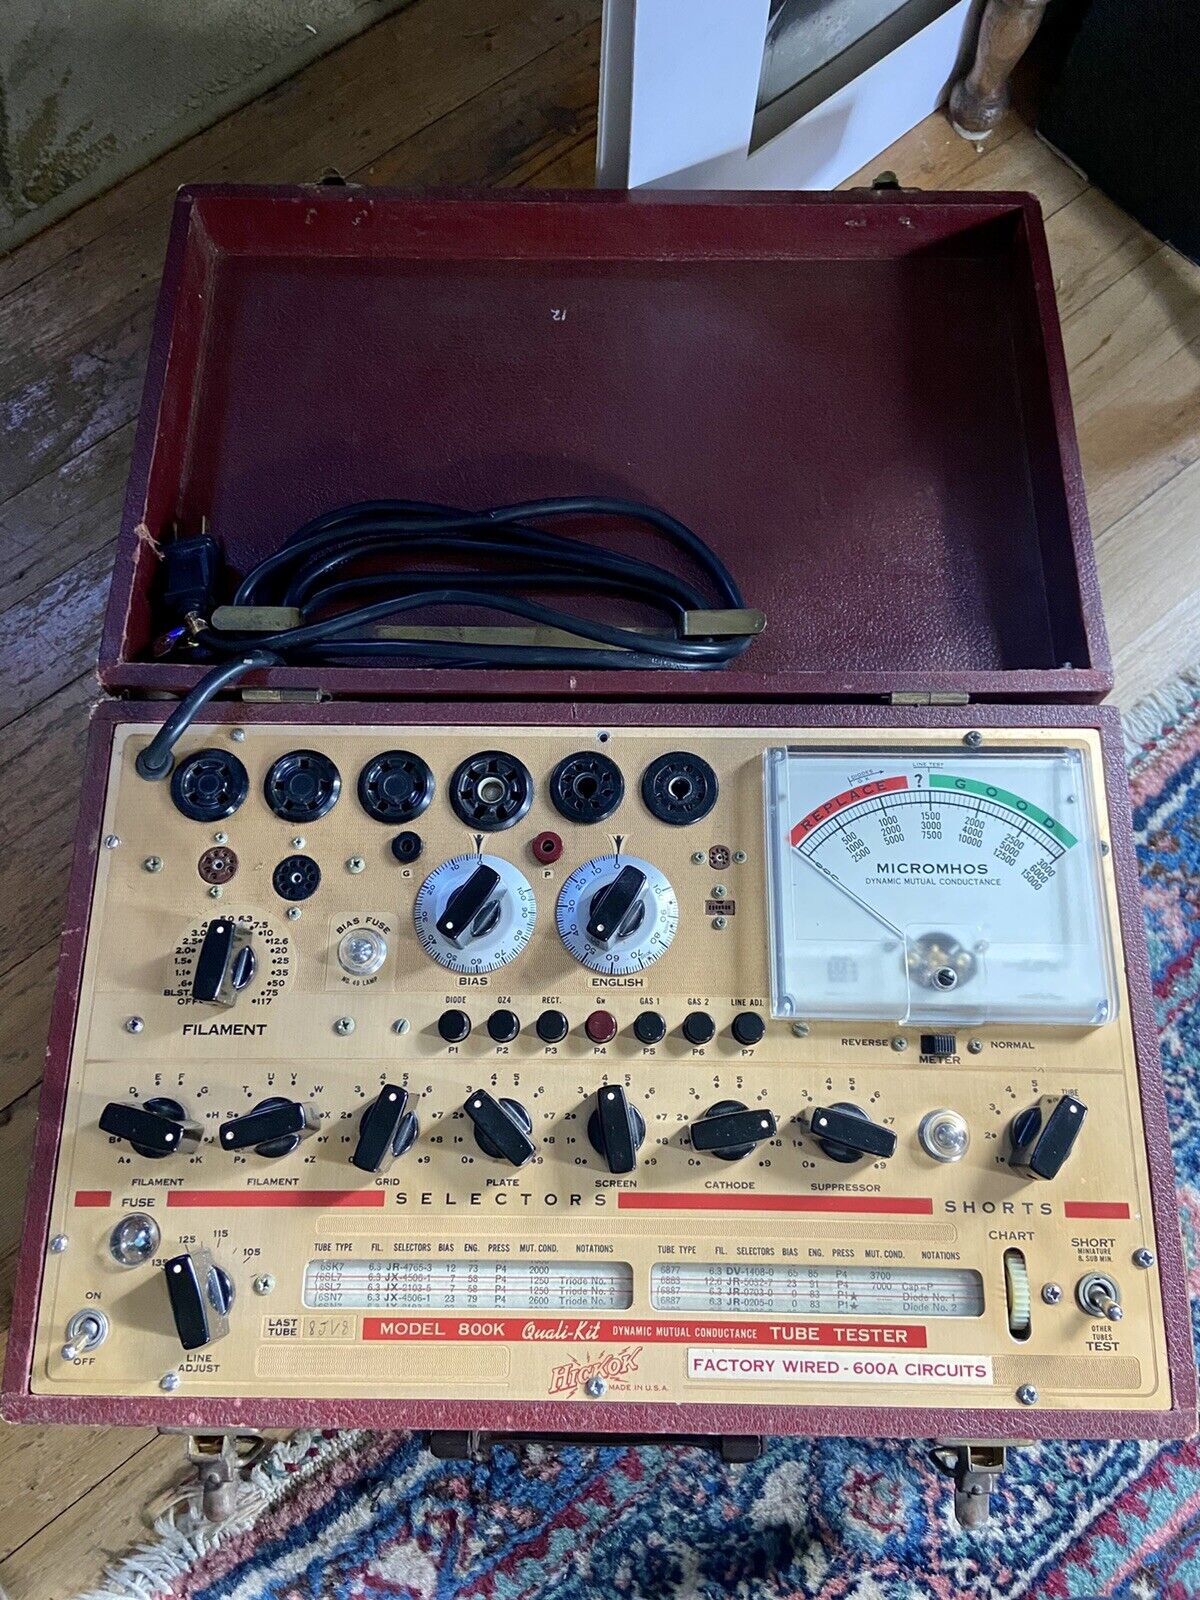 Clean Hickok 600a Gold Face Mutual Conductance Tube Tester With New Power Cord